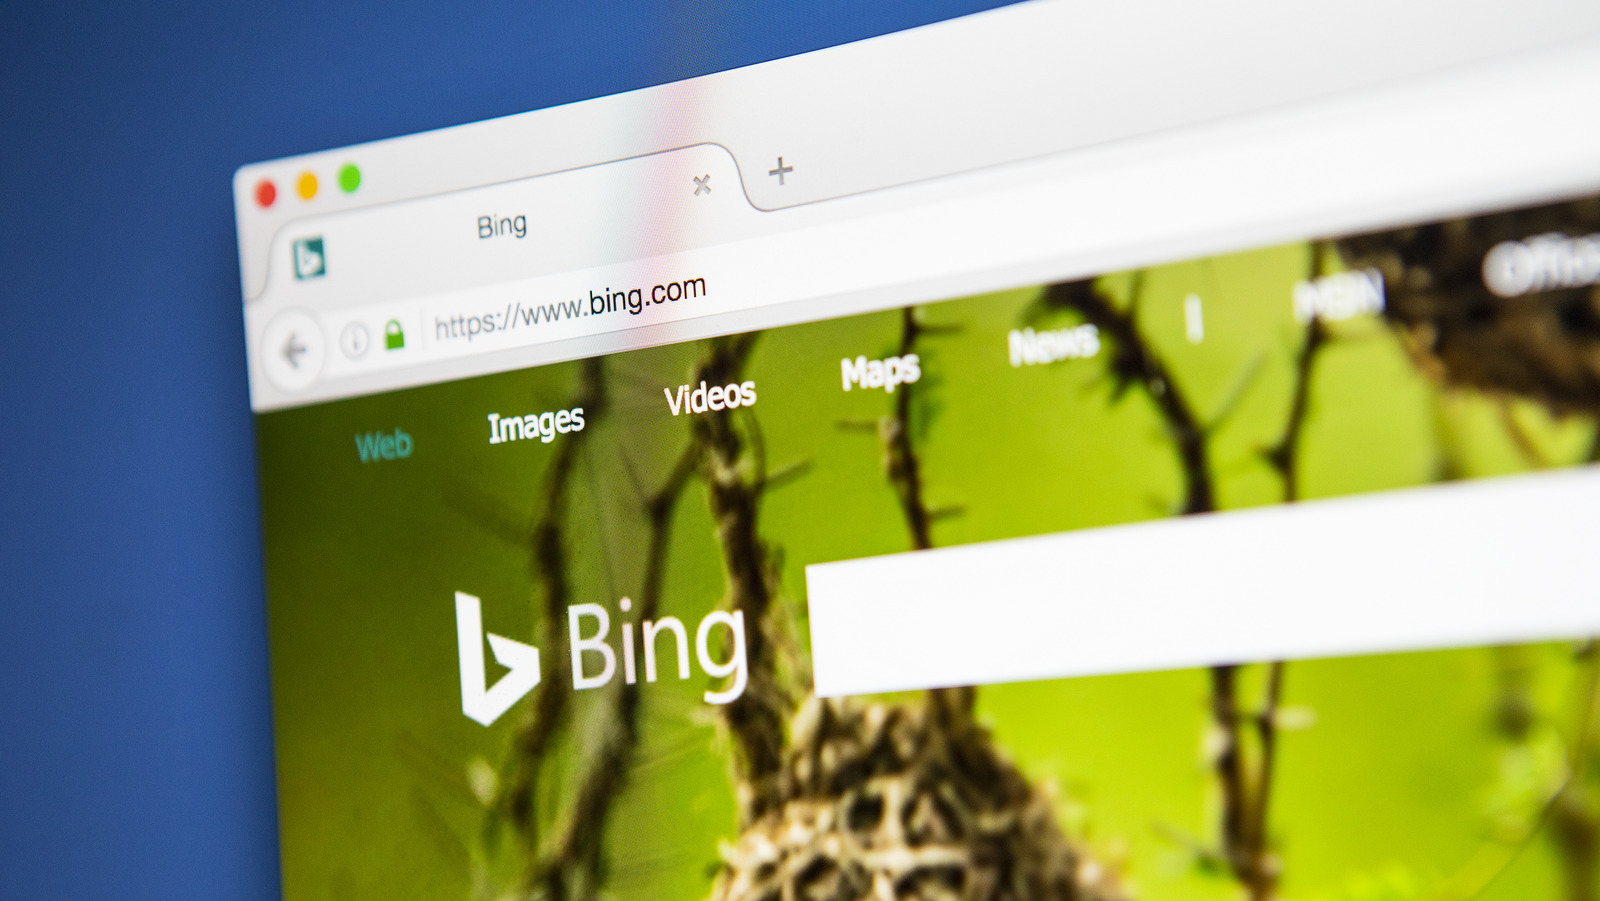 Why did Bing take over Chrome?